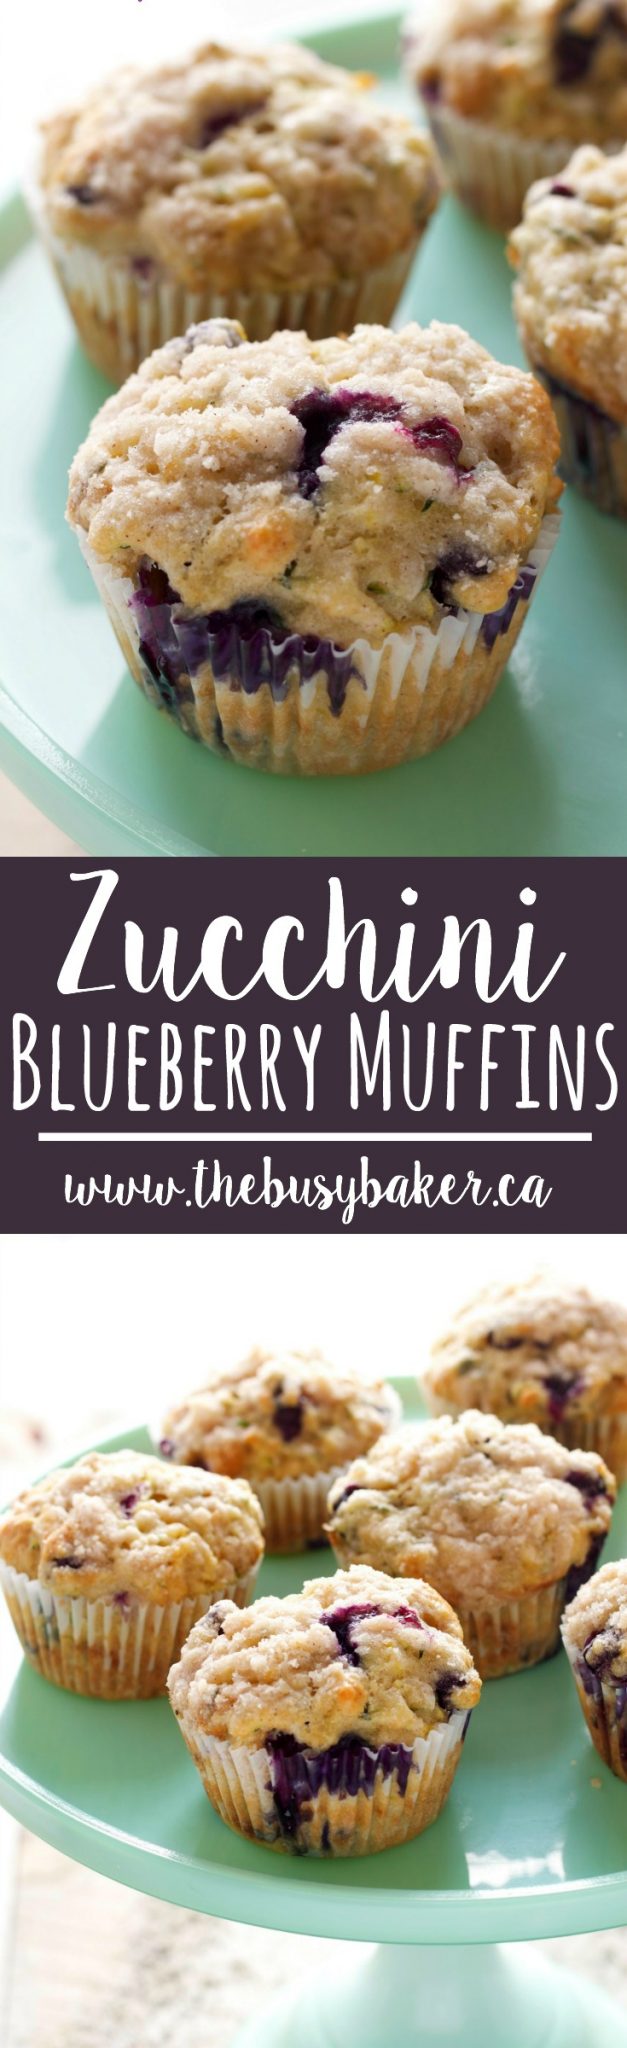 These Zucchini Blueberry Muffins are made with unsweetened applesauce, grated zucchini and fresh juicy blueberries for the perfect healthy snack! Recipe from thebusybaker.ca! #muffins #zucchini #blueberrymuffins #blueberry #summer #snack #homemade #baking via @busybakerblog